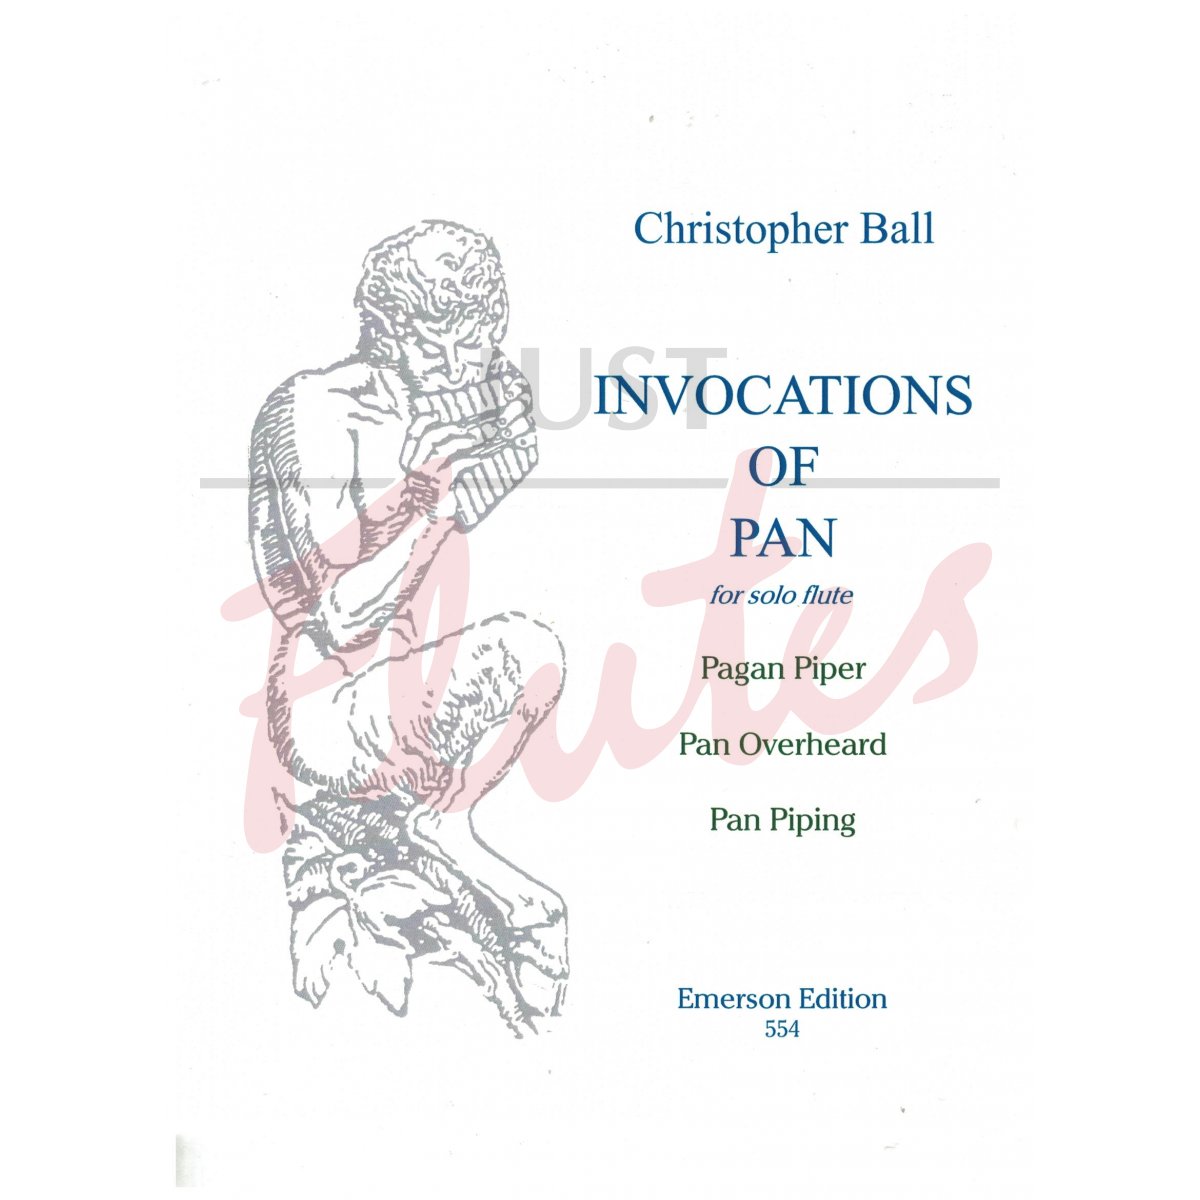 Invocations of Pan for Solo Flute